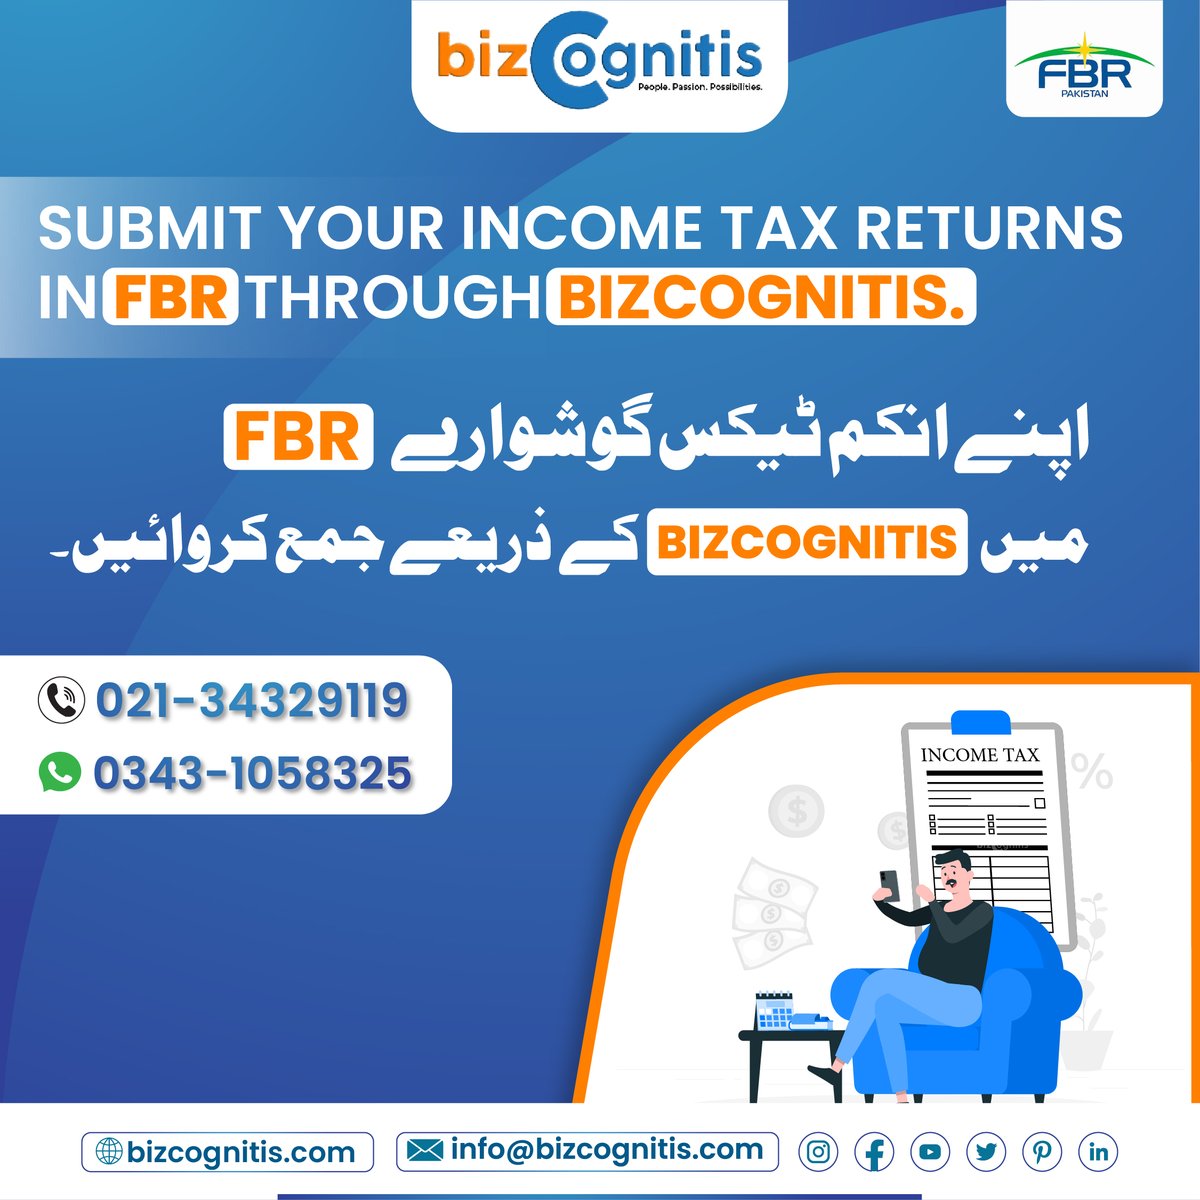 Submit your income tax returns in FBR through bizcognitis. 

🌐 𝗪𝗲𝗯𝘀𝗶𝘁𝗲: bizcognitis.com
📧 𝗘𝗺𝗮𝗶𝗹: info@bizcognitis.com
☎️ 𝗠𝗼𝗯𝗶𝗹𝗲: 03431058325

#FBR #filer #submittaxreturn #incometax #bizcognitis #contactusnow #taxreturn2022